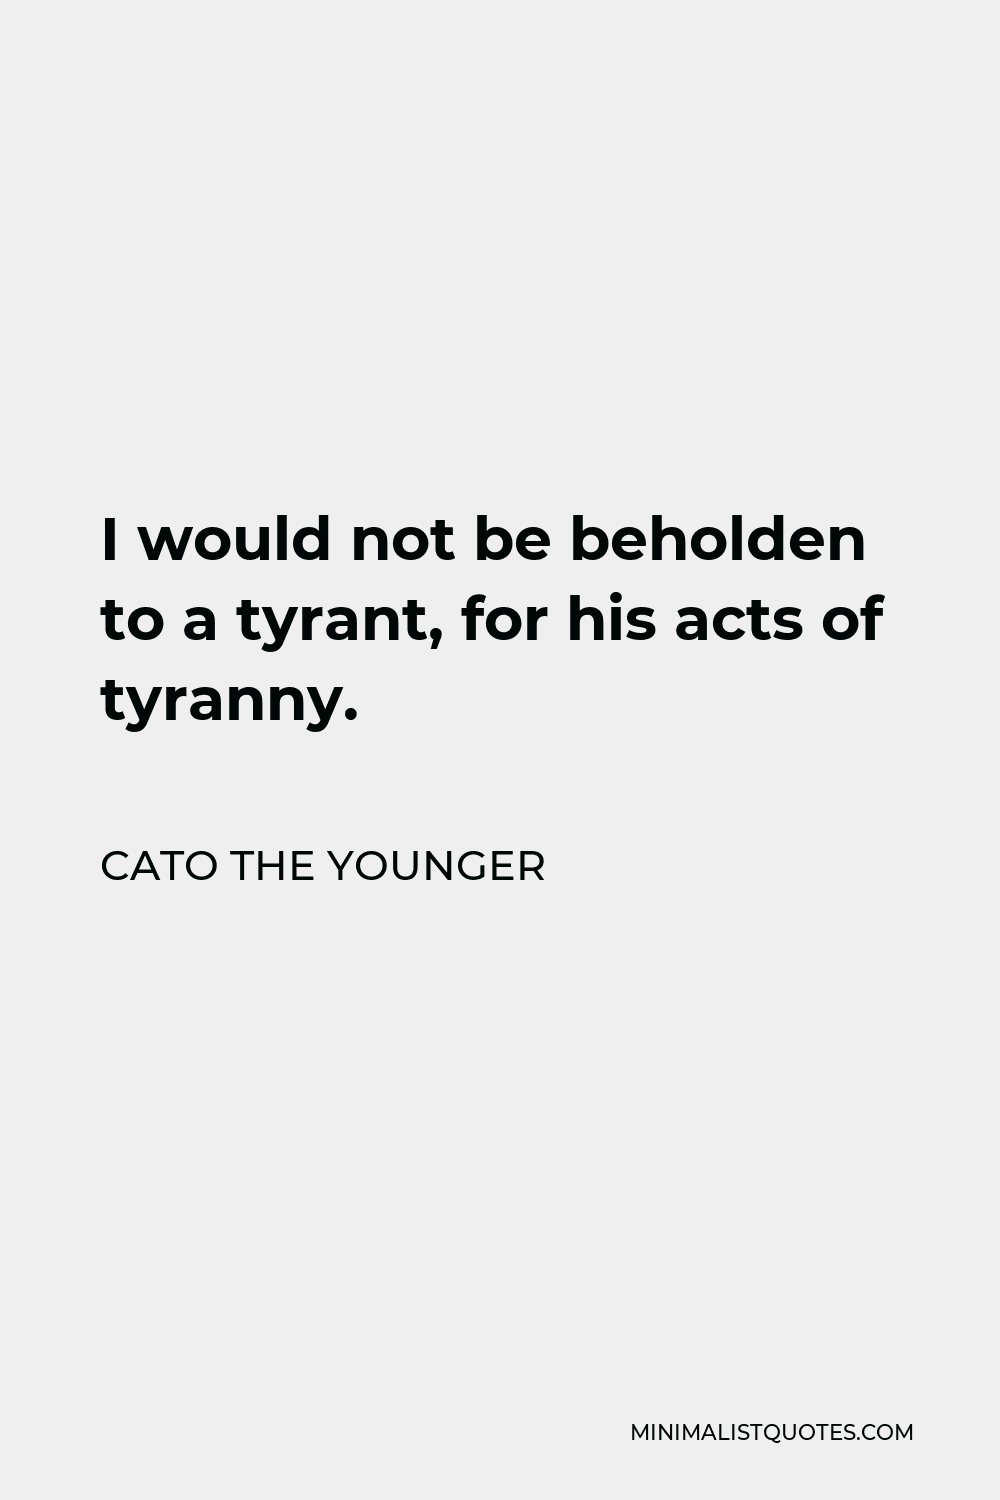 Cato the Younger Quote - I would not be beholden to a tyrant, for his acts of tyranny.